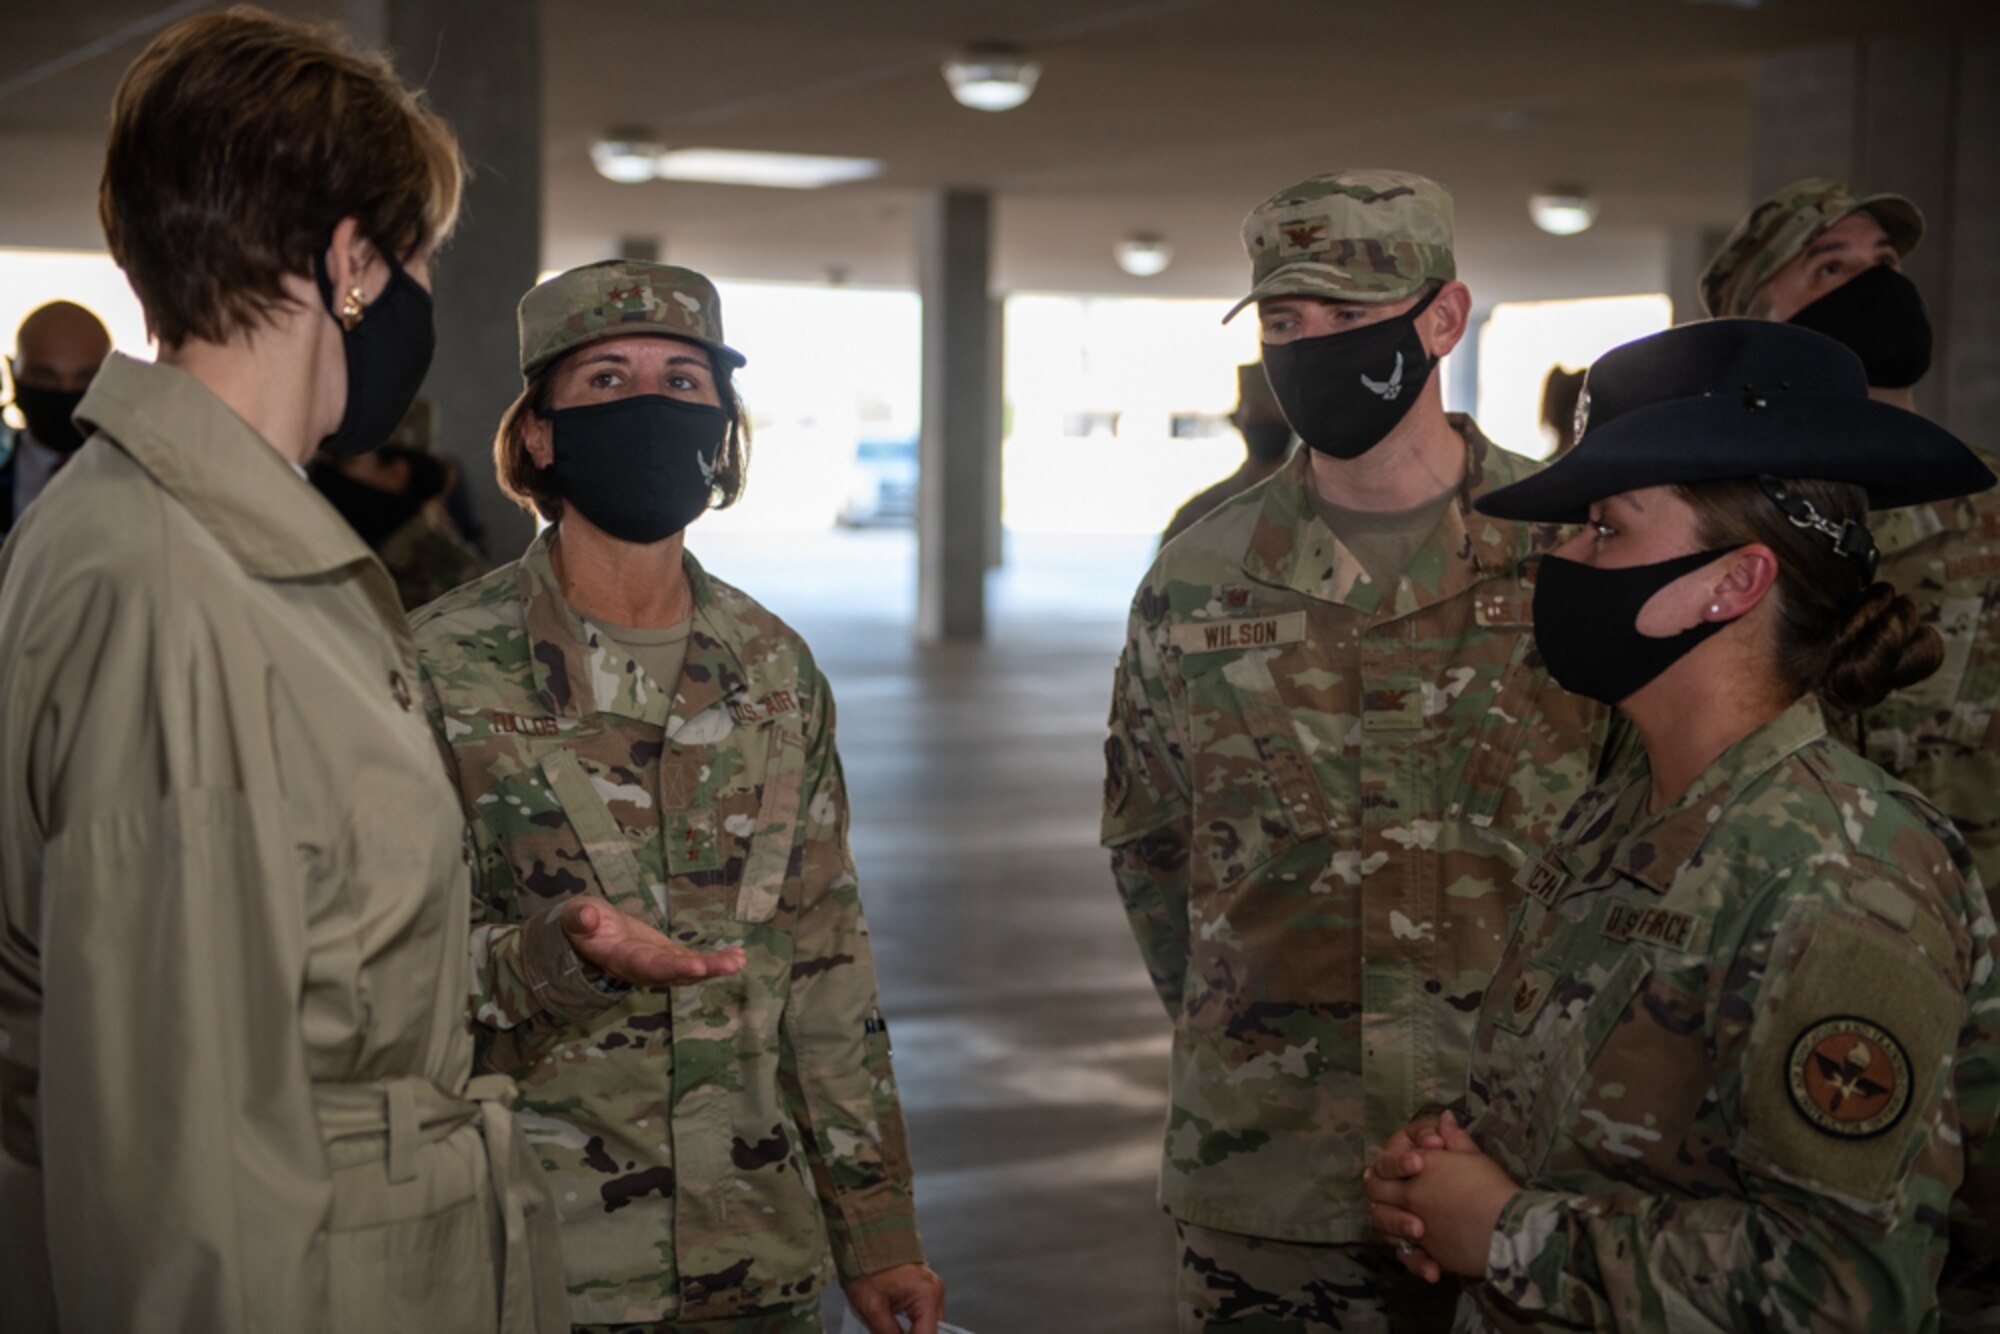 Secretary of the Air Force Barbara M. Barrett (left) listens as Maj. Gen. Andrea Tullos, 2nd Air Force commander, talks about basic military training during a tour of the Airman Training Complex Aug. 21, 2020, at Joint Base San Antonio-Lackland, Texas.